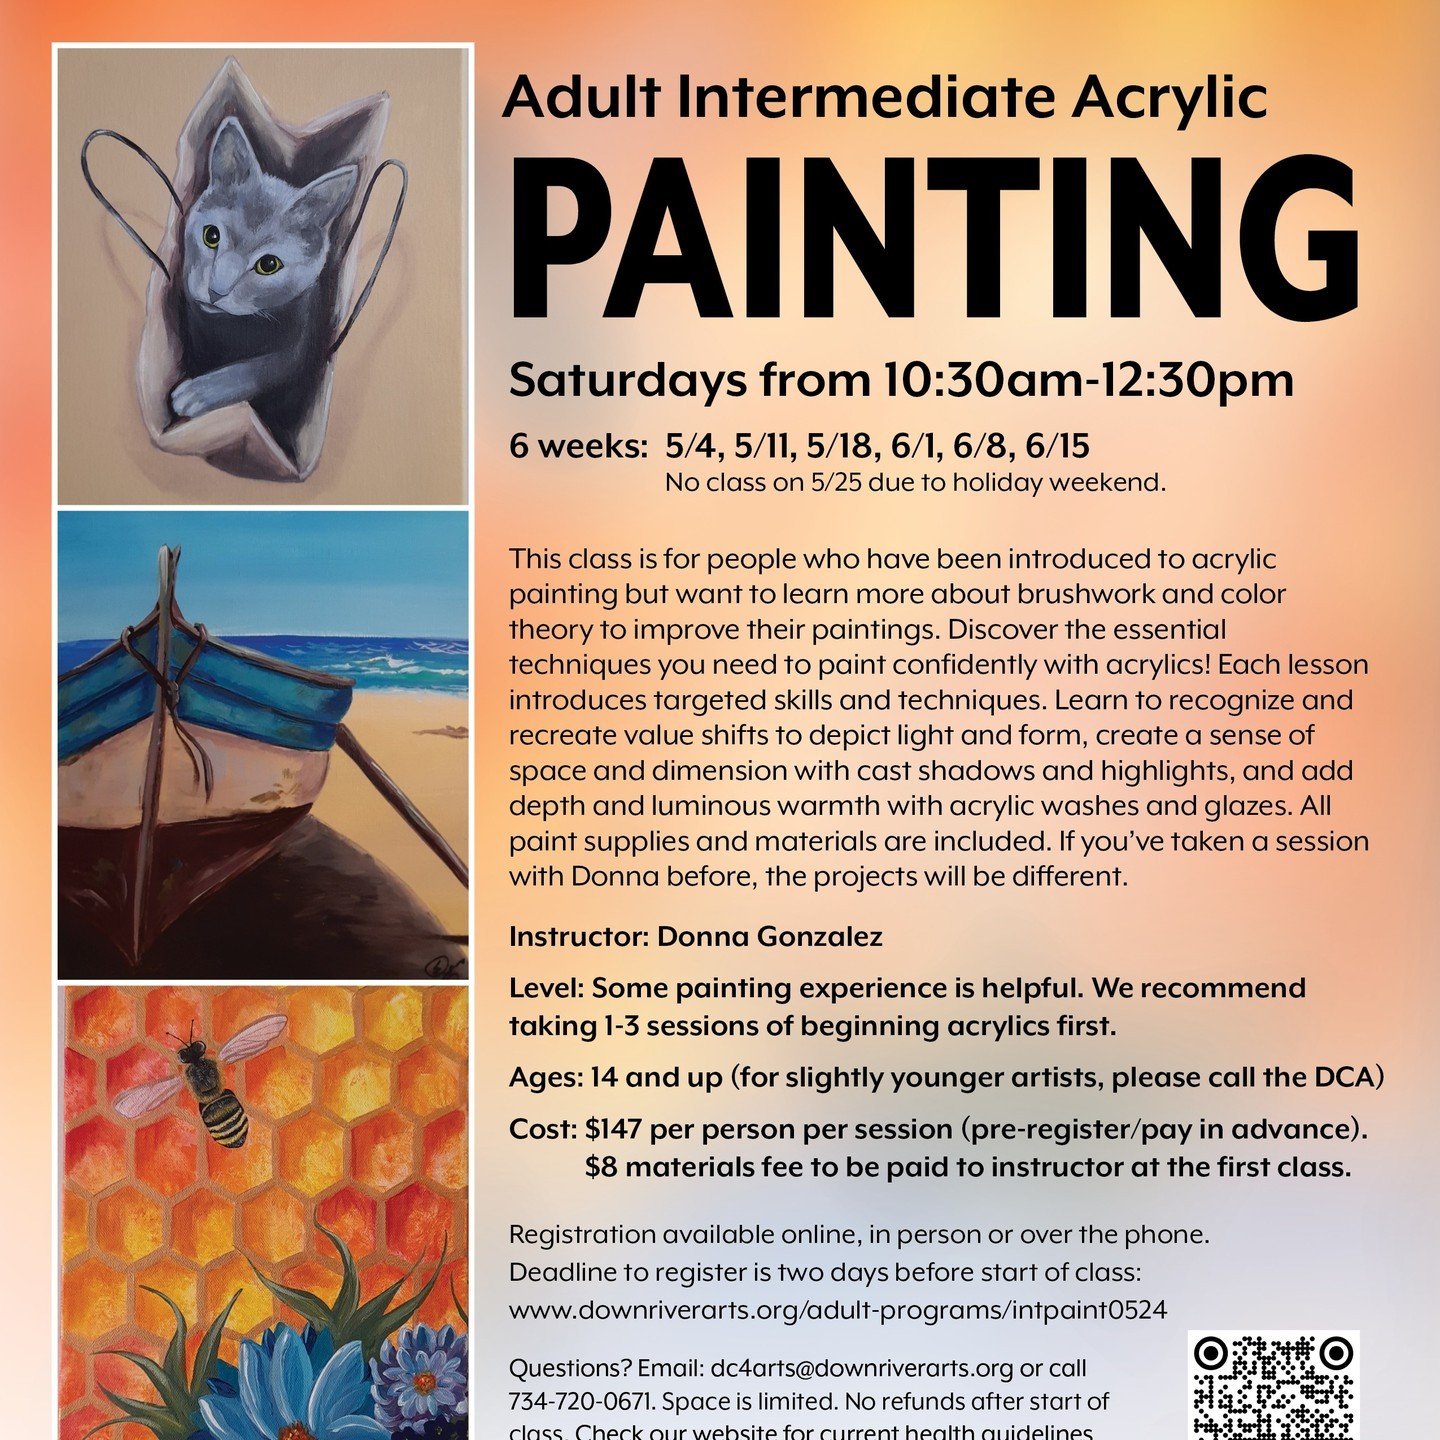 Last chance to register for for Immediate Level Acrylics class! This class is for people who have been introduced to acrylic painting but want to learn more about brushwork and color theory to improve their paintings. Discover the essential technique